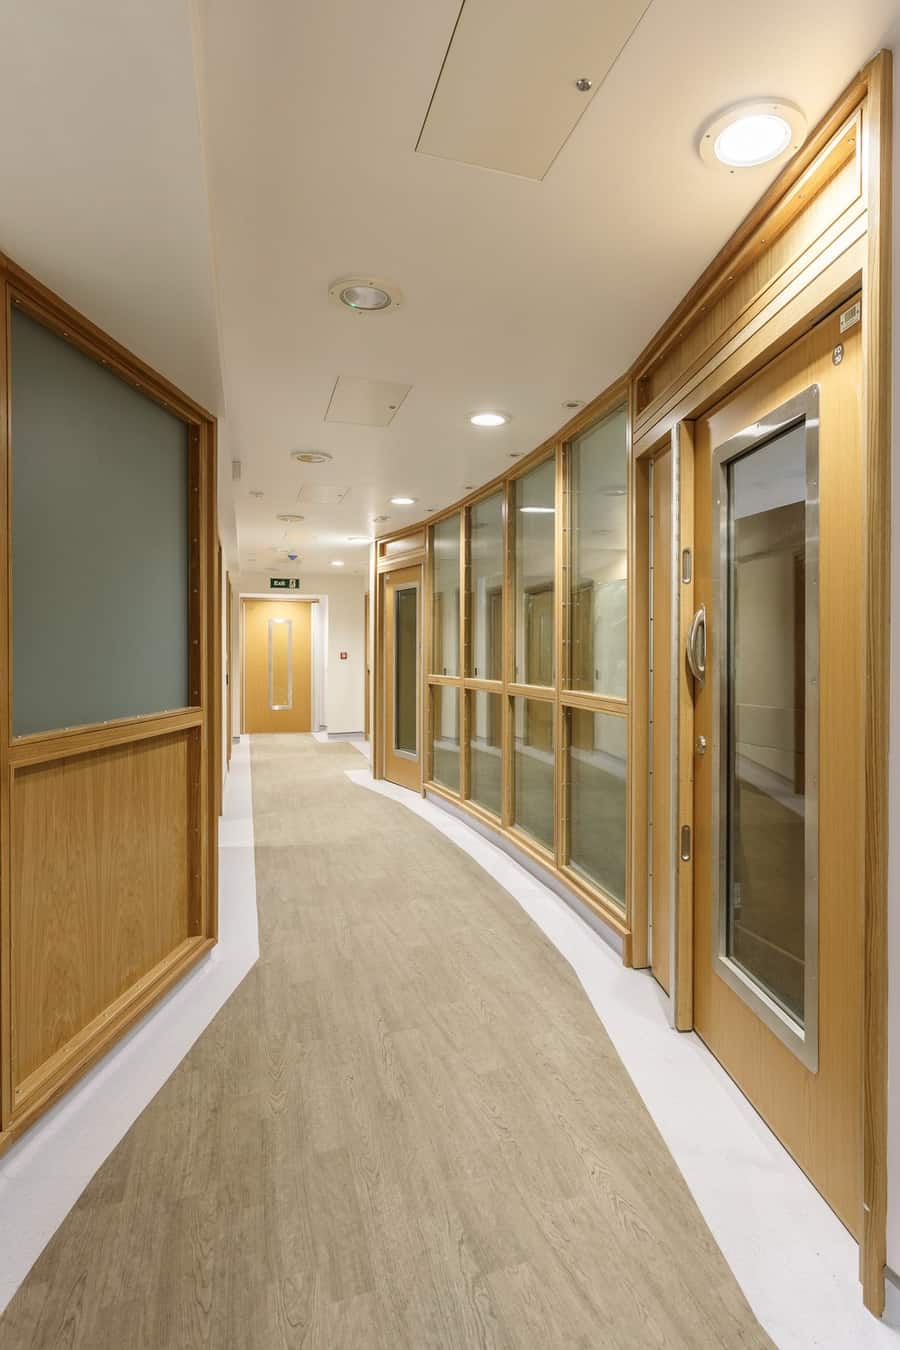  Another view of the corridor with the doors, frame and glazed screen 